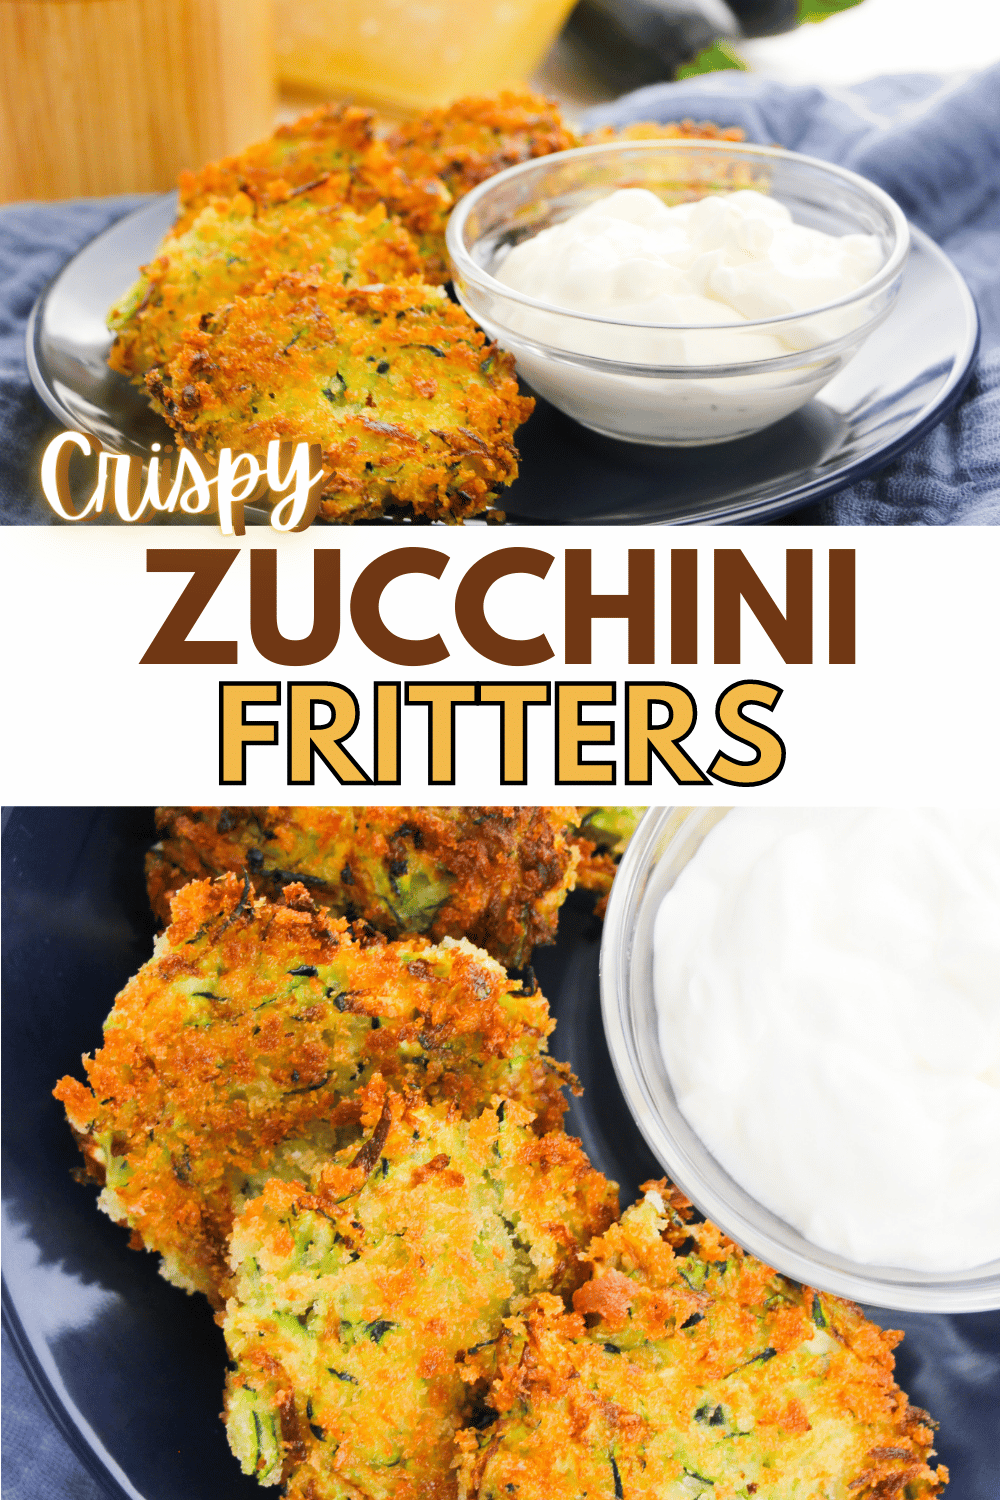 These Crispy Zucchini Fritters are a delicious way to use up summer zucchini! They’re an easy to make side dish or appetizer. #crispyzucchinifritters #zucchinifritters #zucchini #fritters via @wondermomwannab